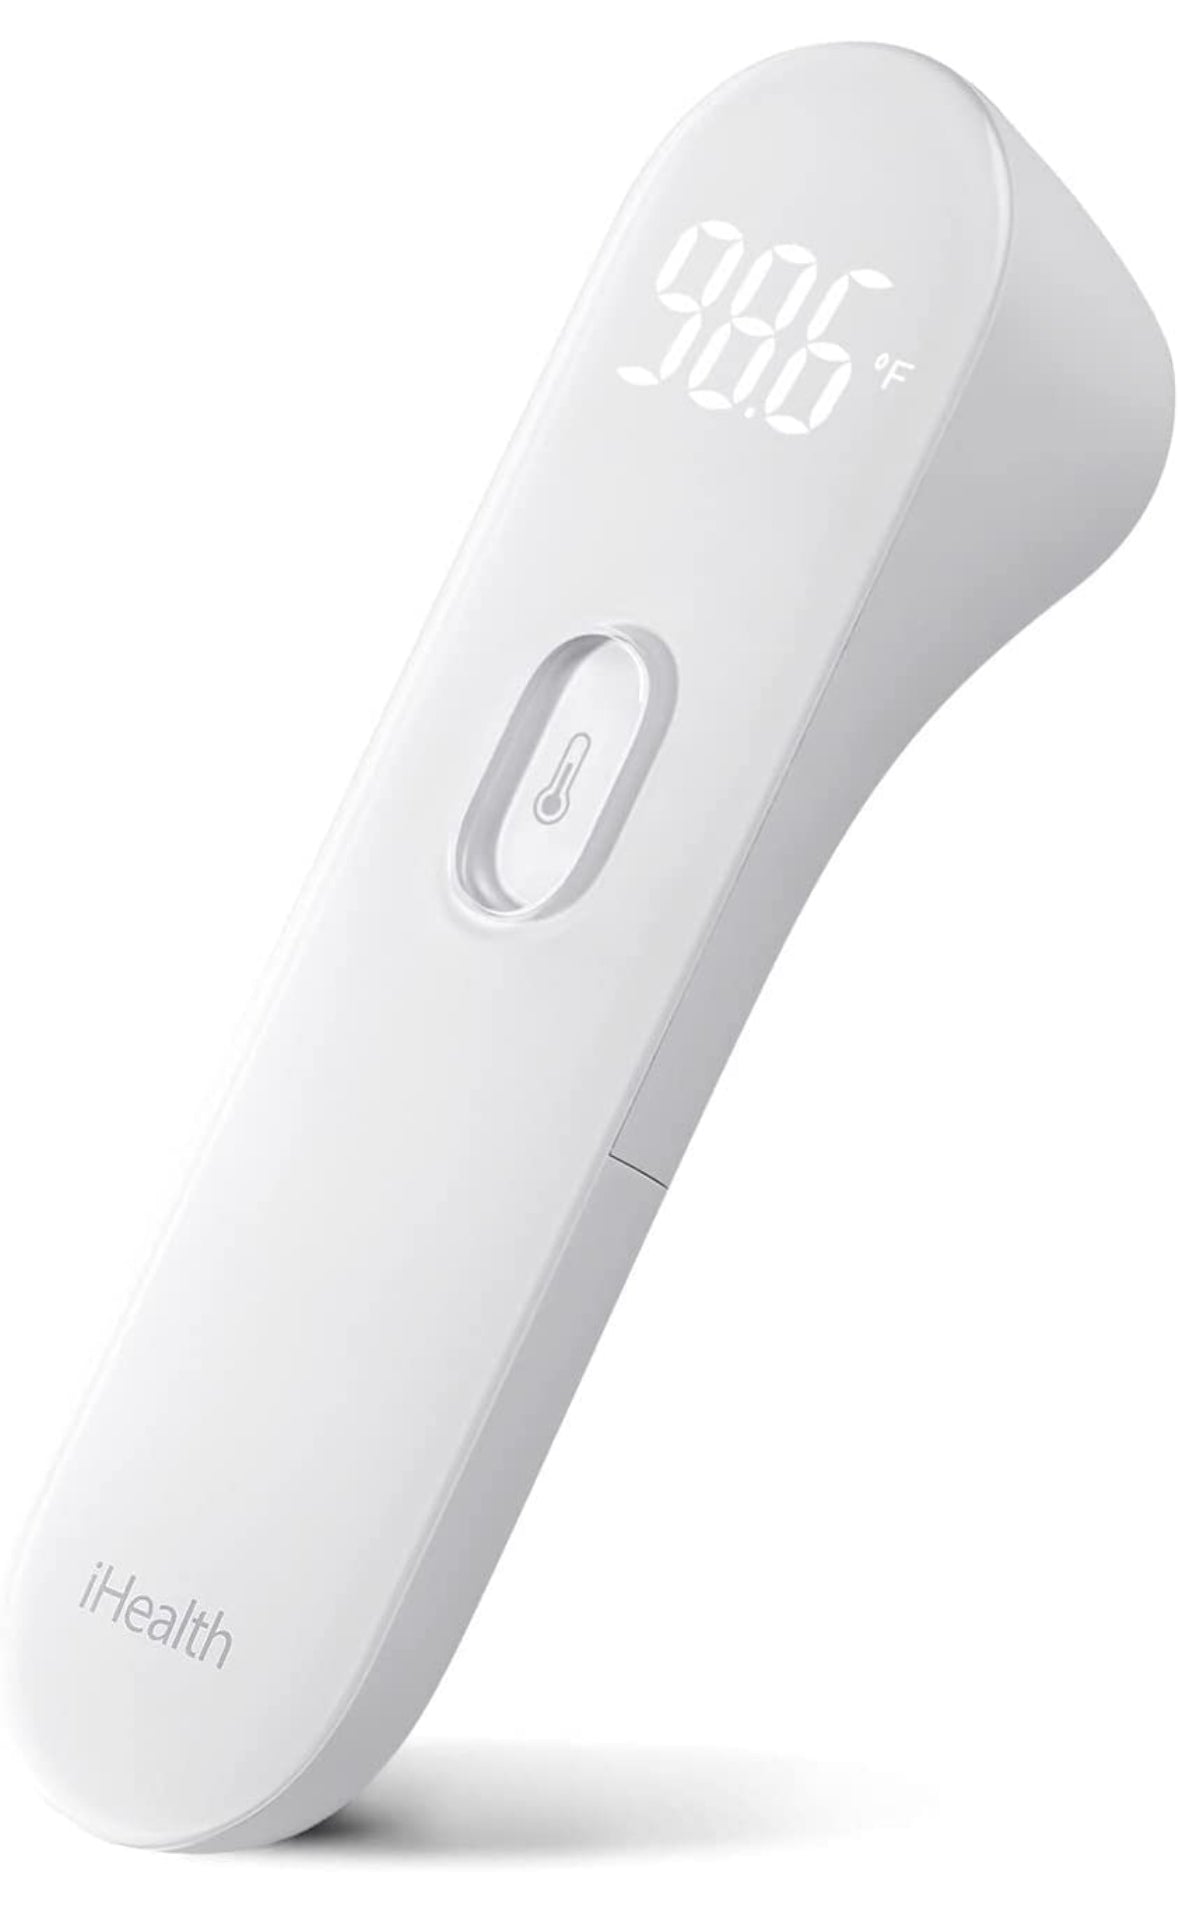 Forehead Digital Infrared Thermometer by iHealth.